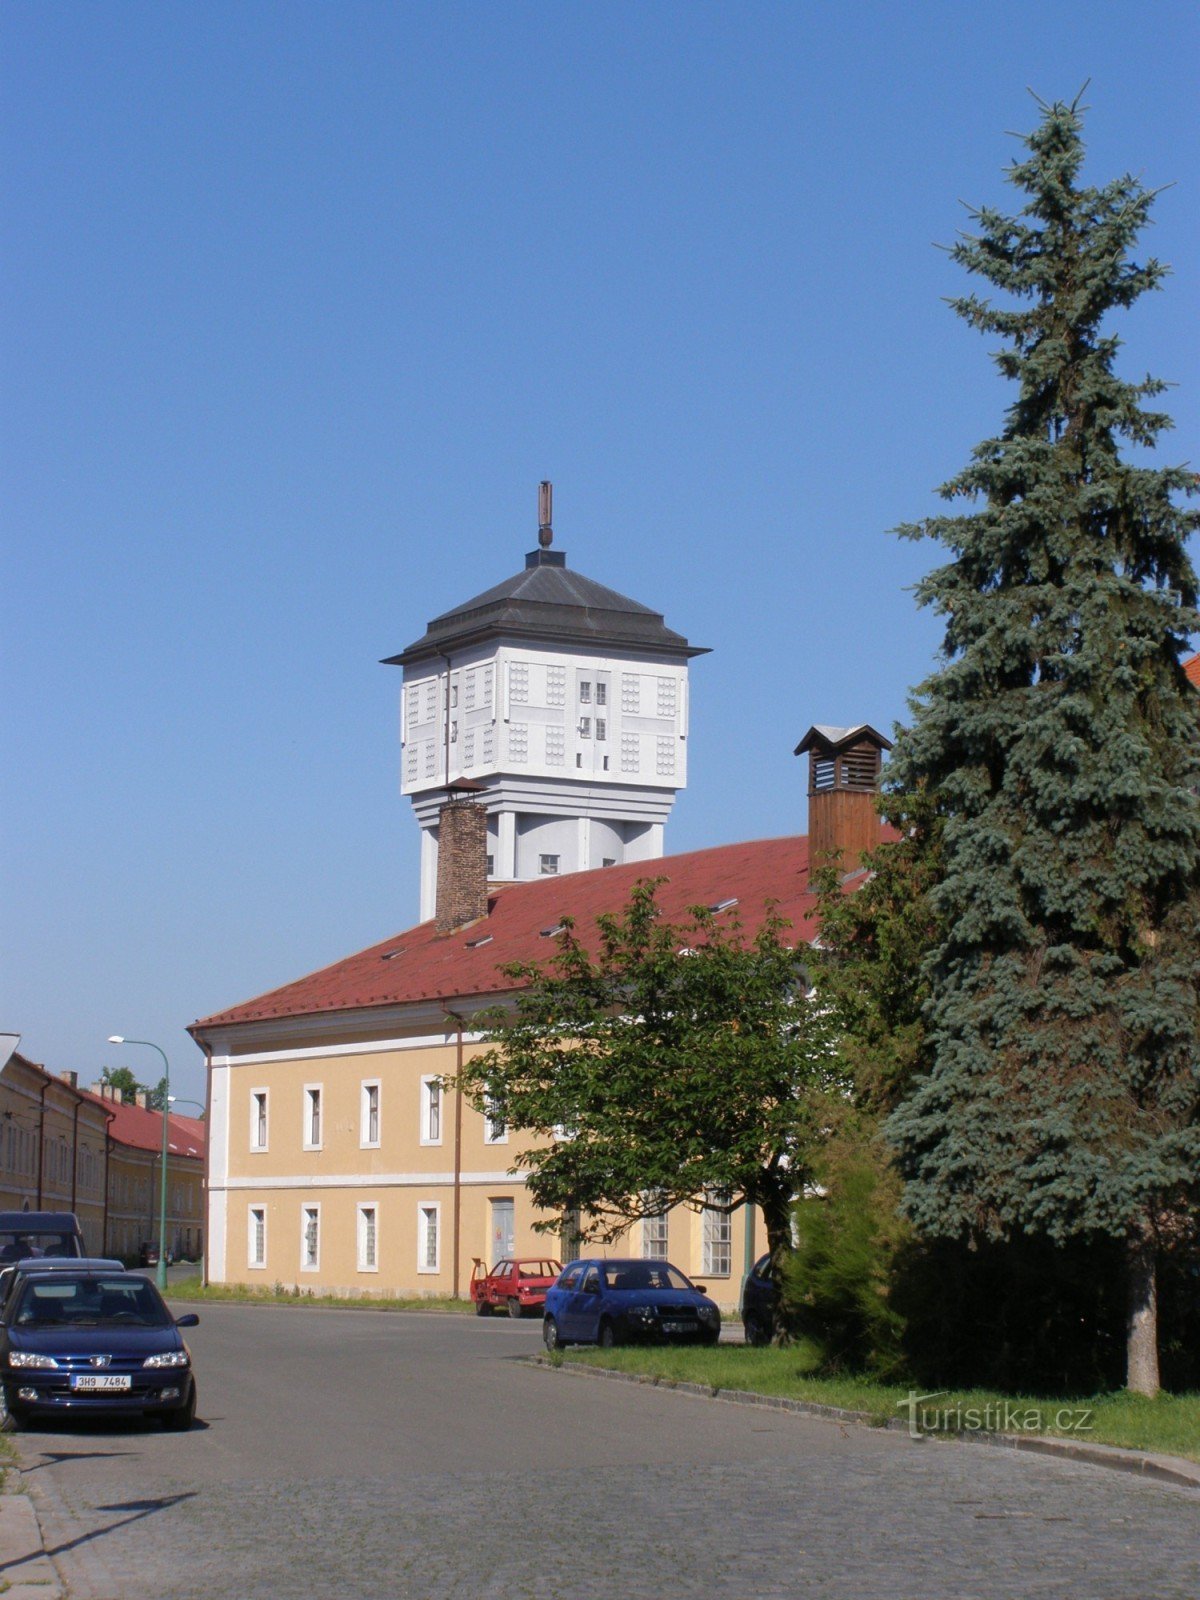 Josefov - water tower and brewery